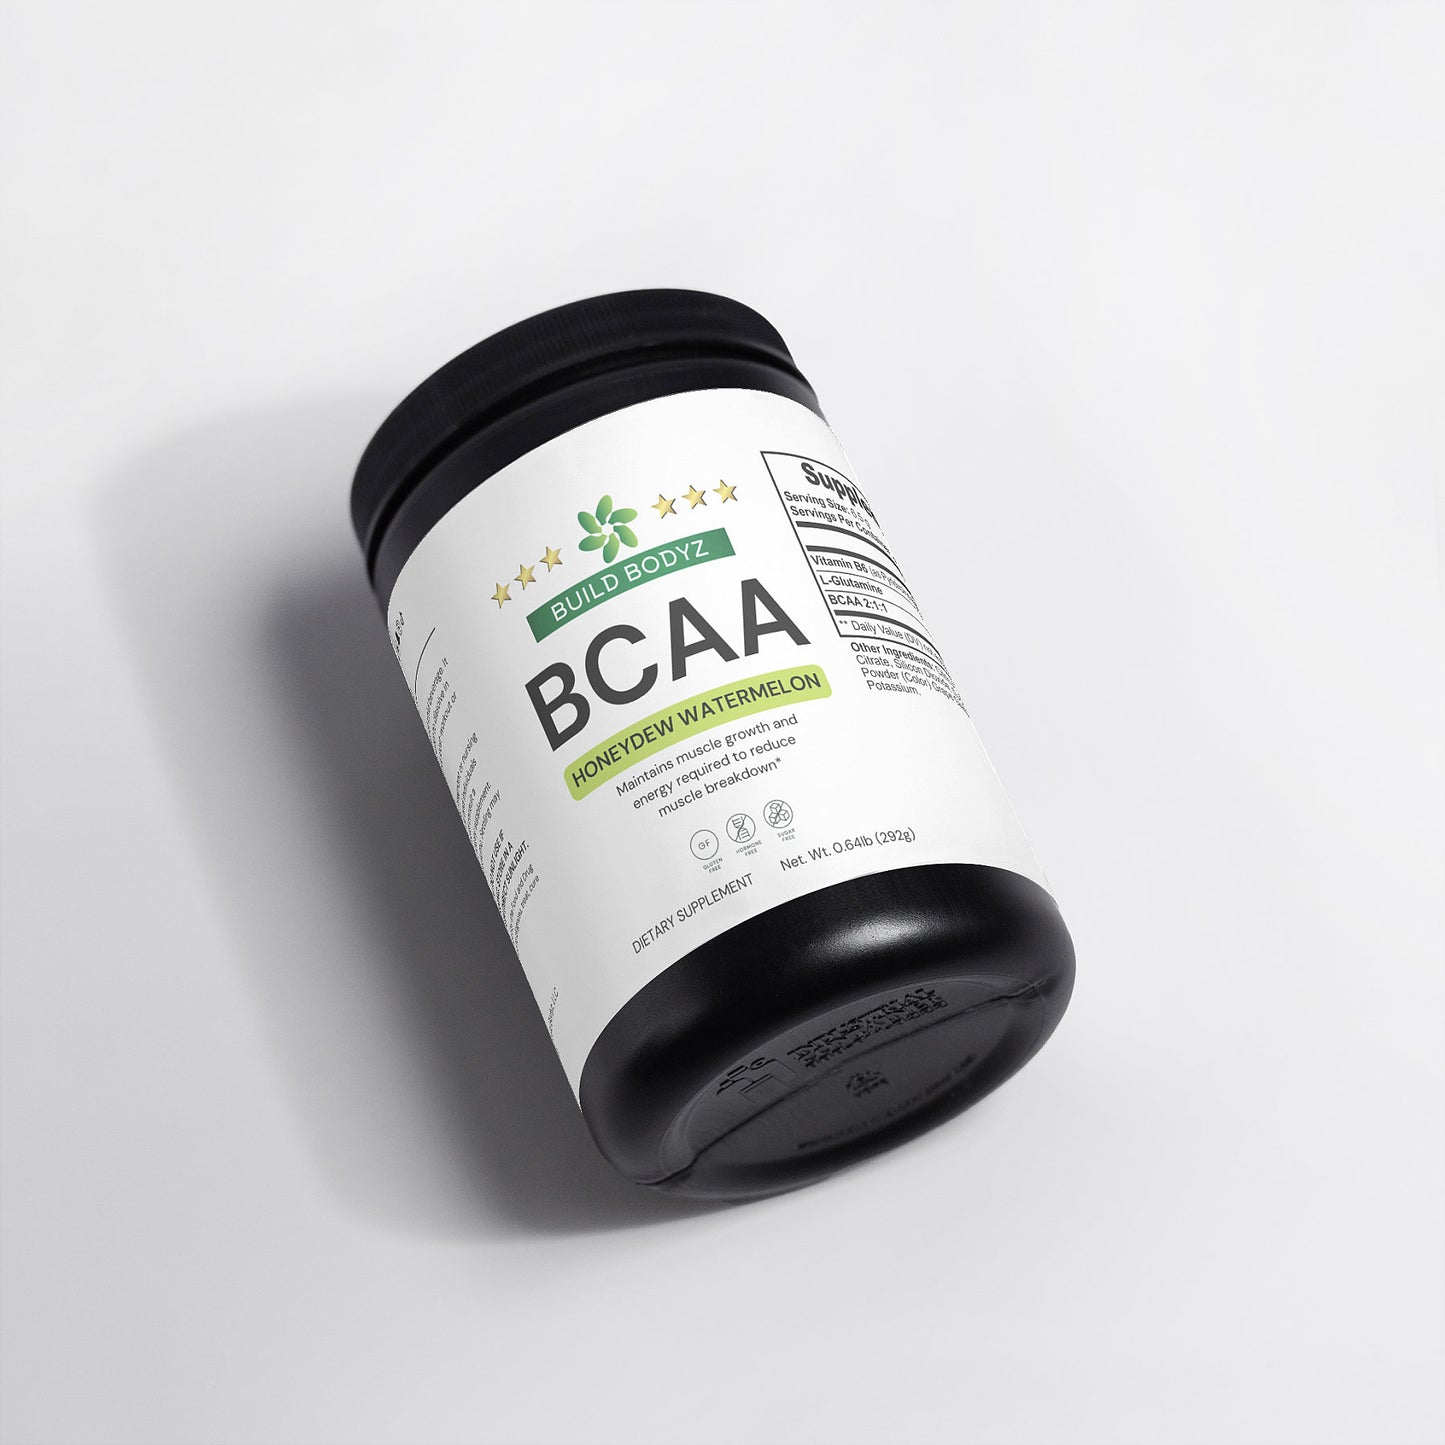 BCAA Post Workout Powder for Lean Muscle and Recovery (Honeydew/Watermelon) - Gluten-Free, Sugar-Free (292g)